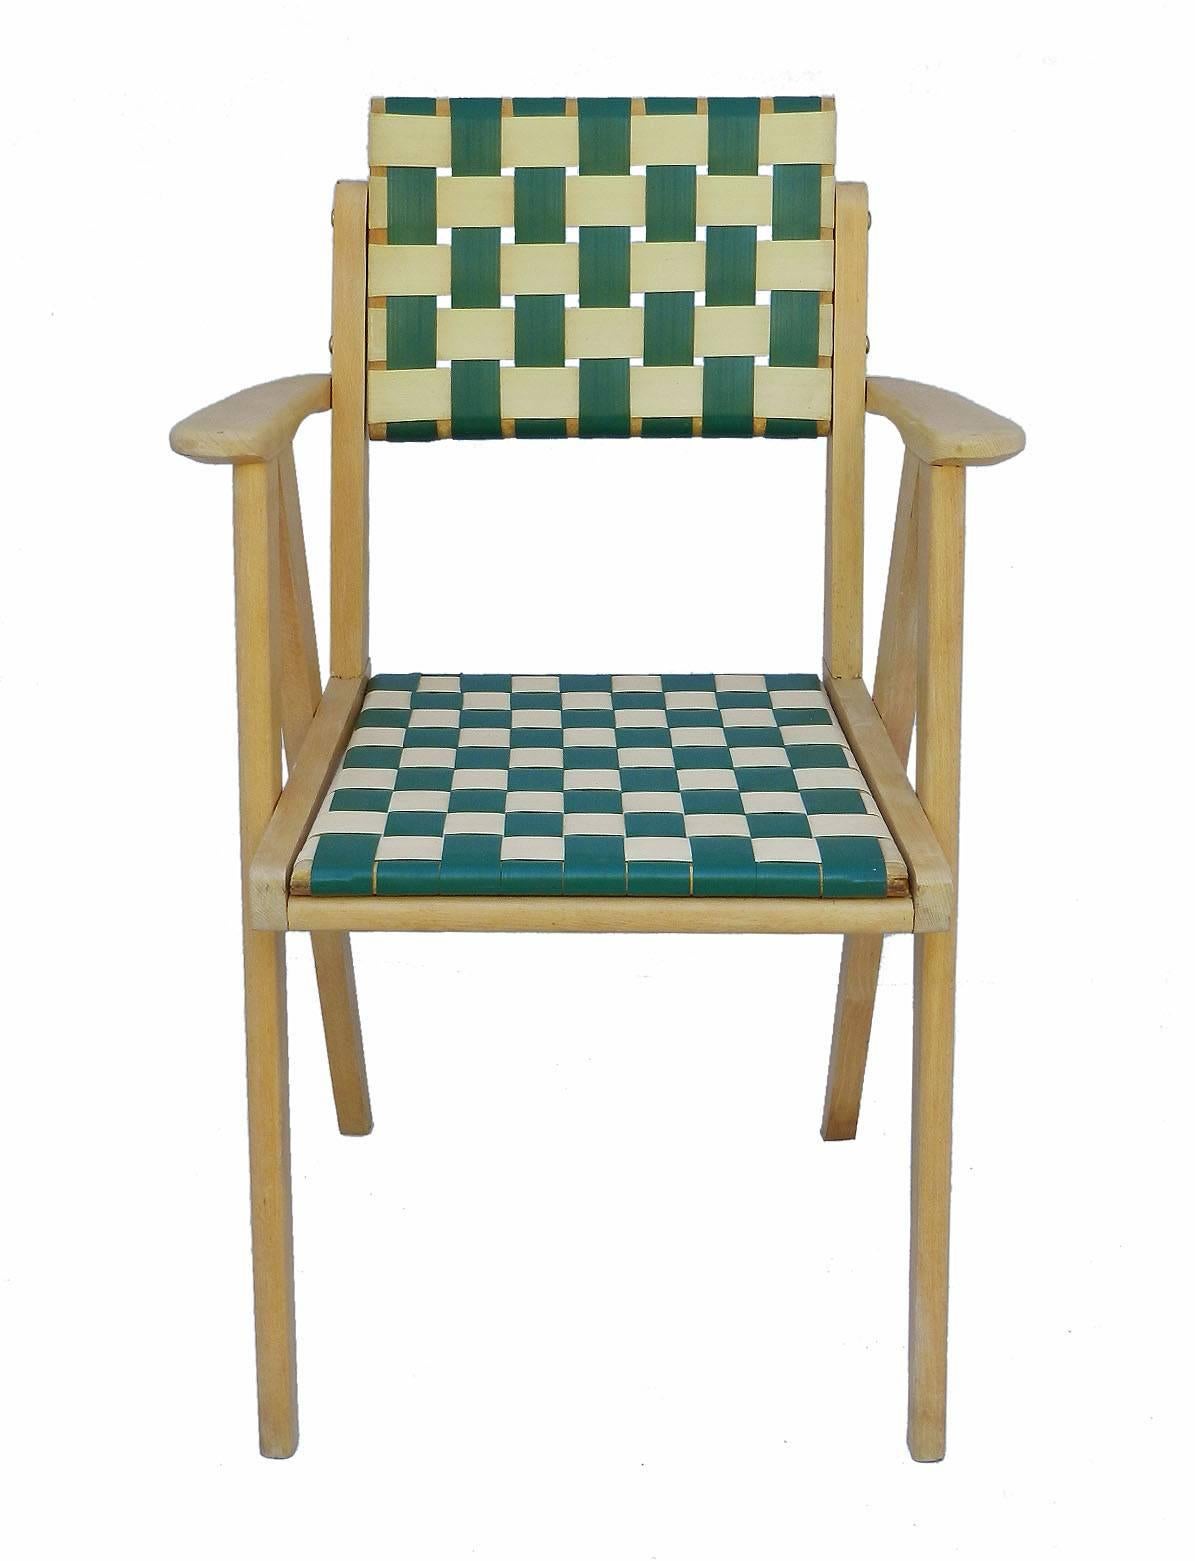 Italian Mid century Open Armchair Lounge Chair Compass Legs Original Woven Seat and Back